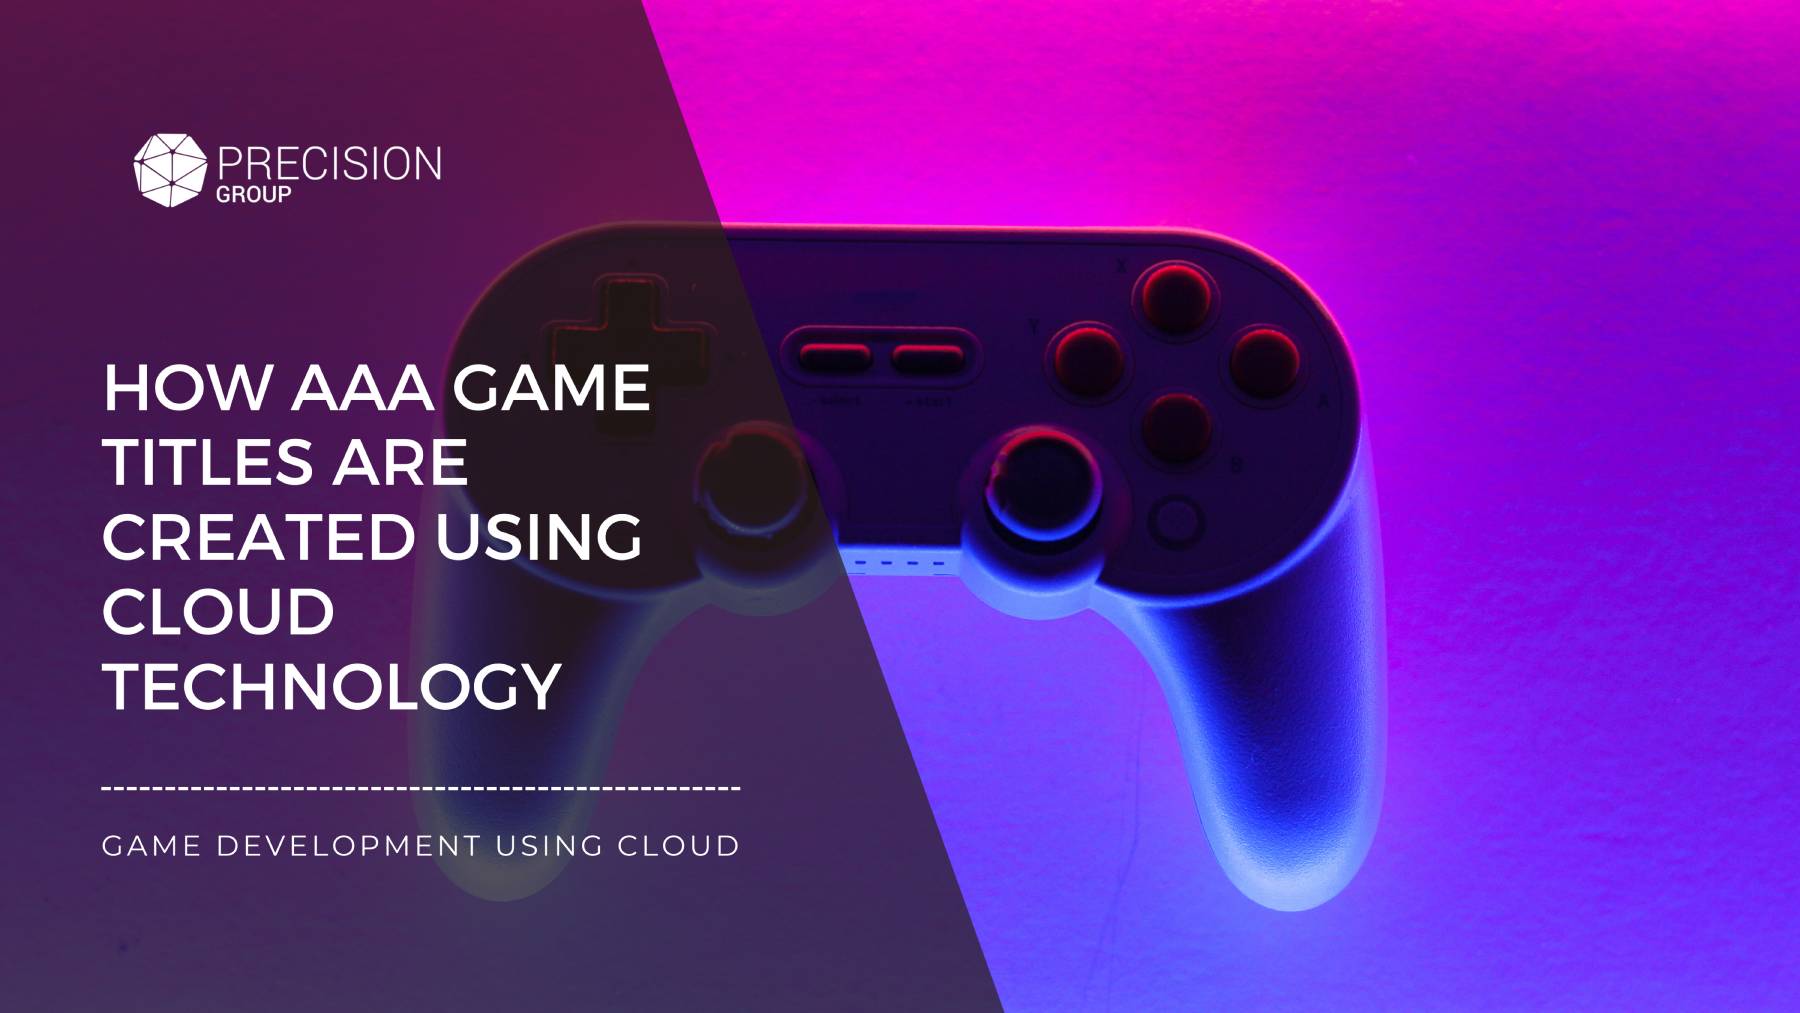 HOW AAA GAME TITLES ARE CREATED USING CLOUD TECHNOLOGY